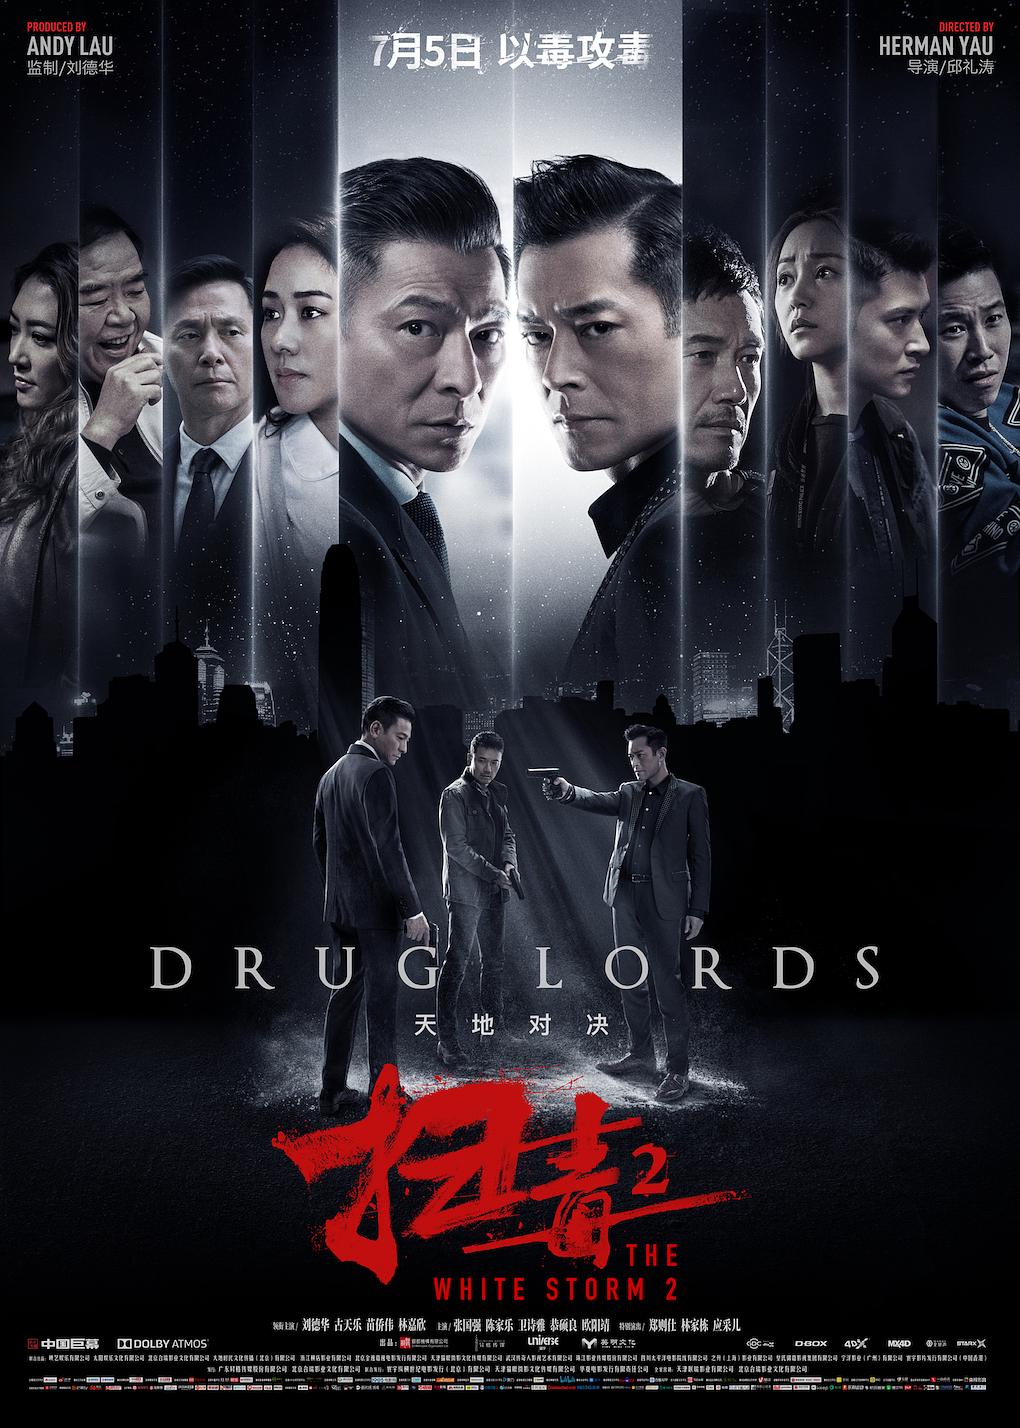 The White Storm 2 Drug Lords (2019) Hindi ORG Dual Audio BluRay 450MB Download